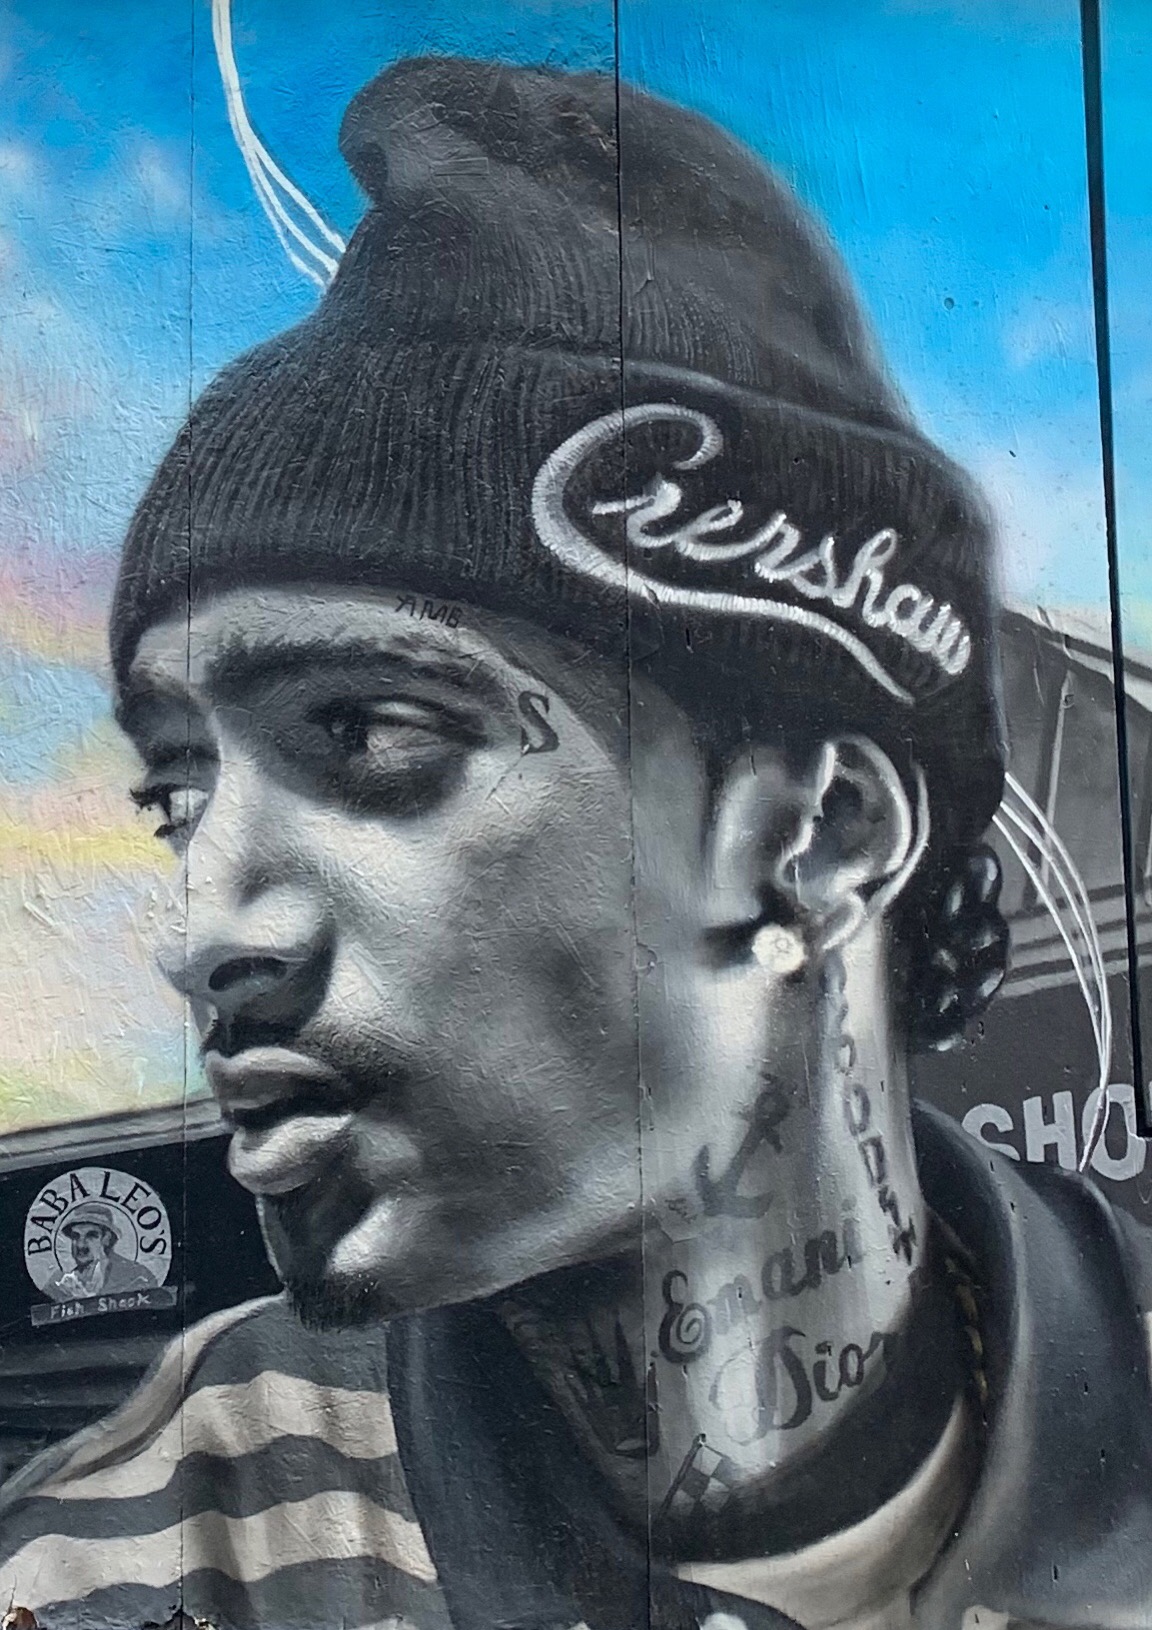 download free nipsey hussle discography